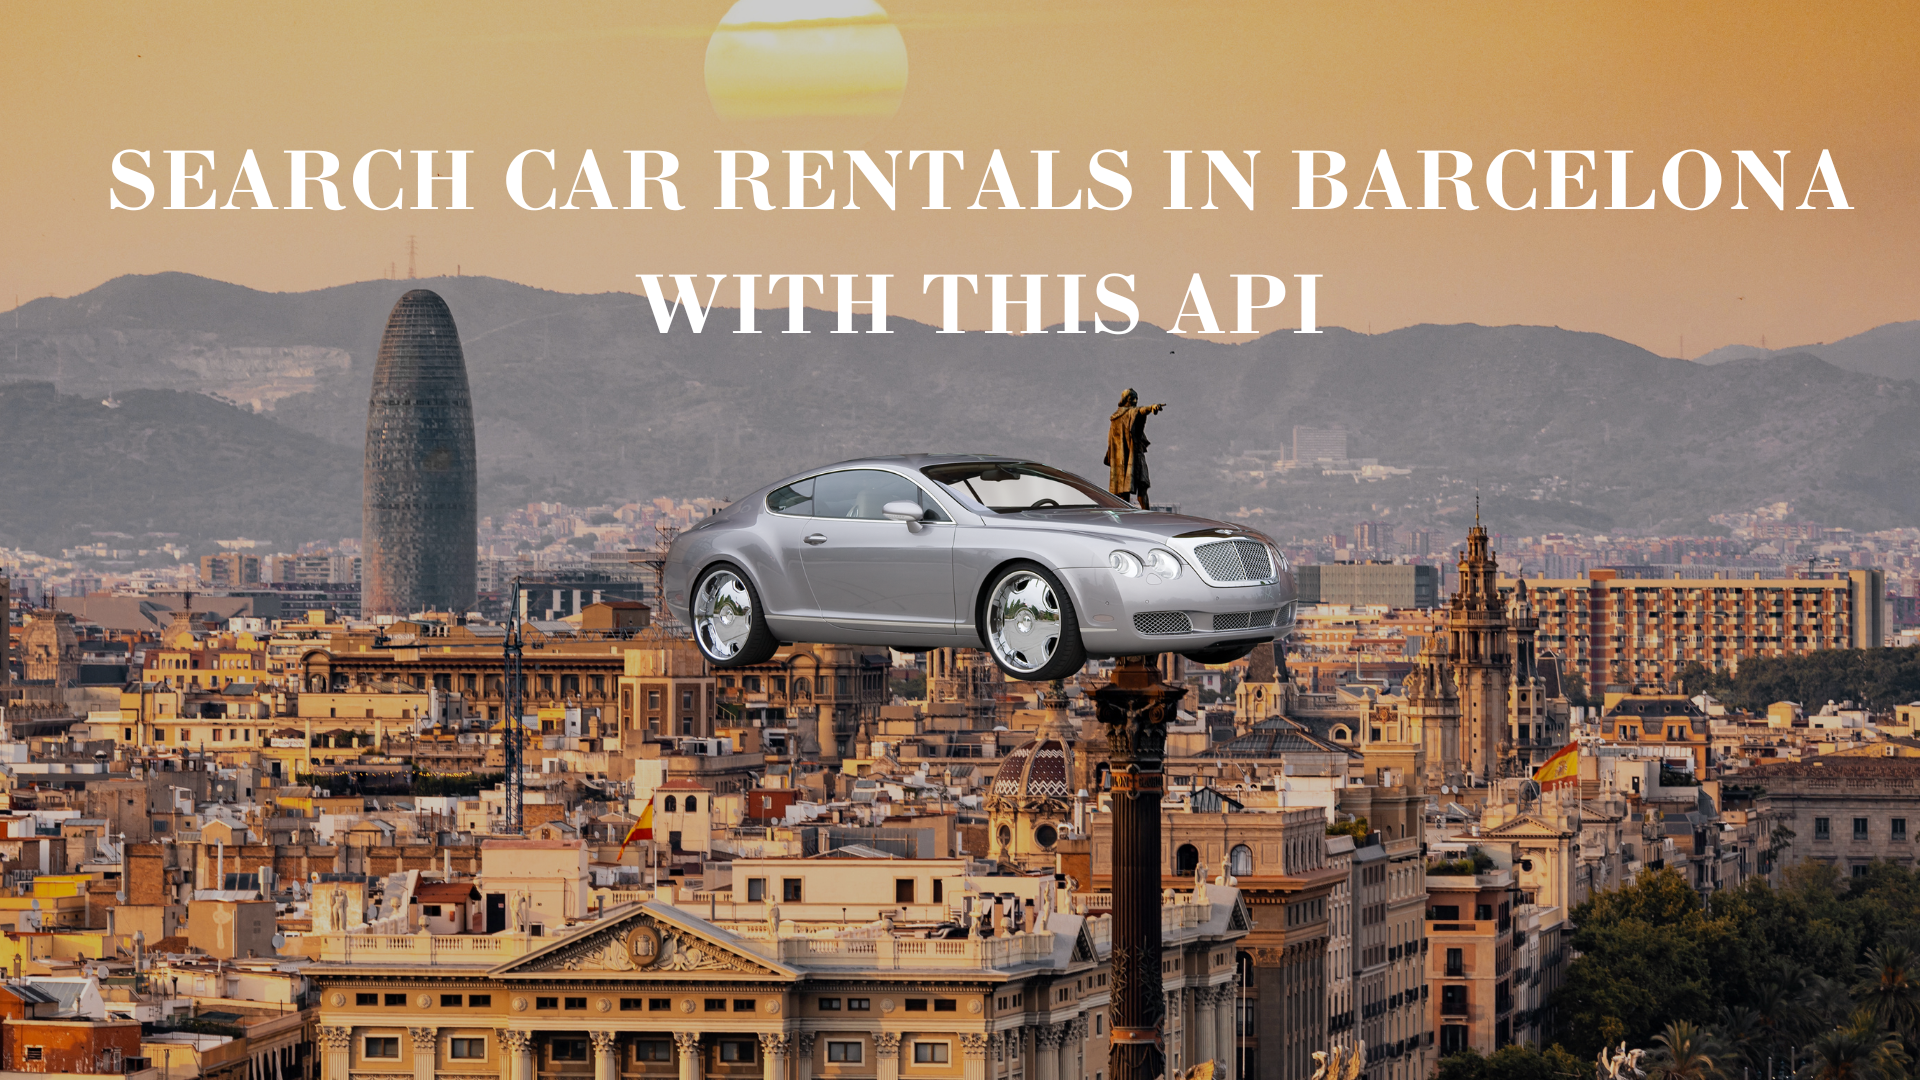 Search Car Rentals In Barcelona With This API